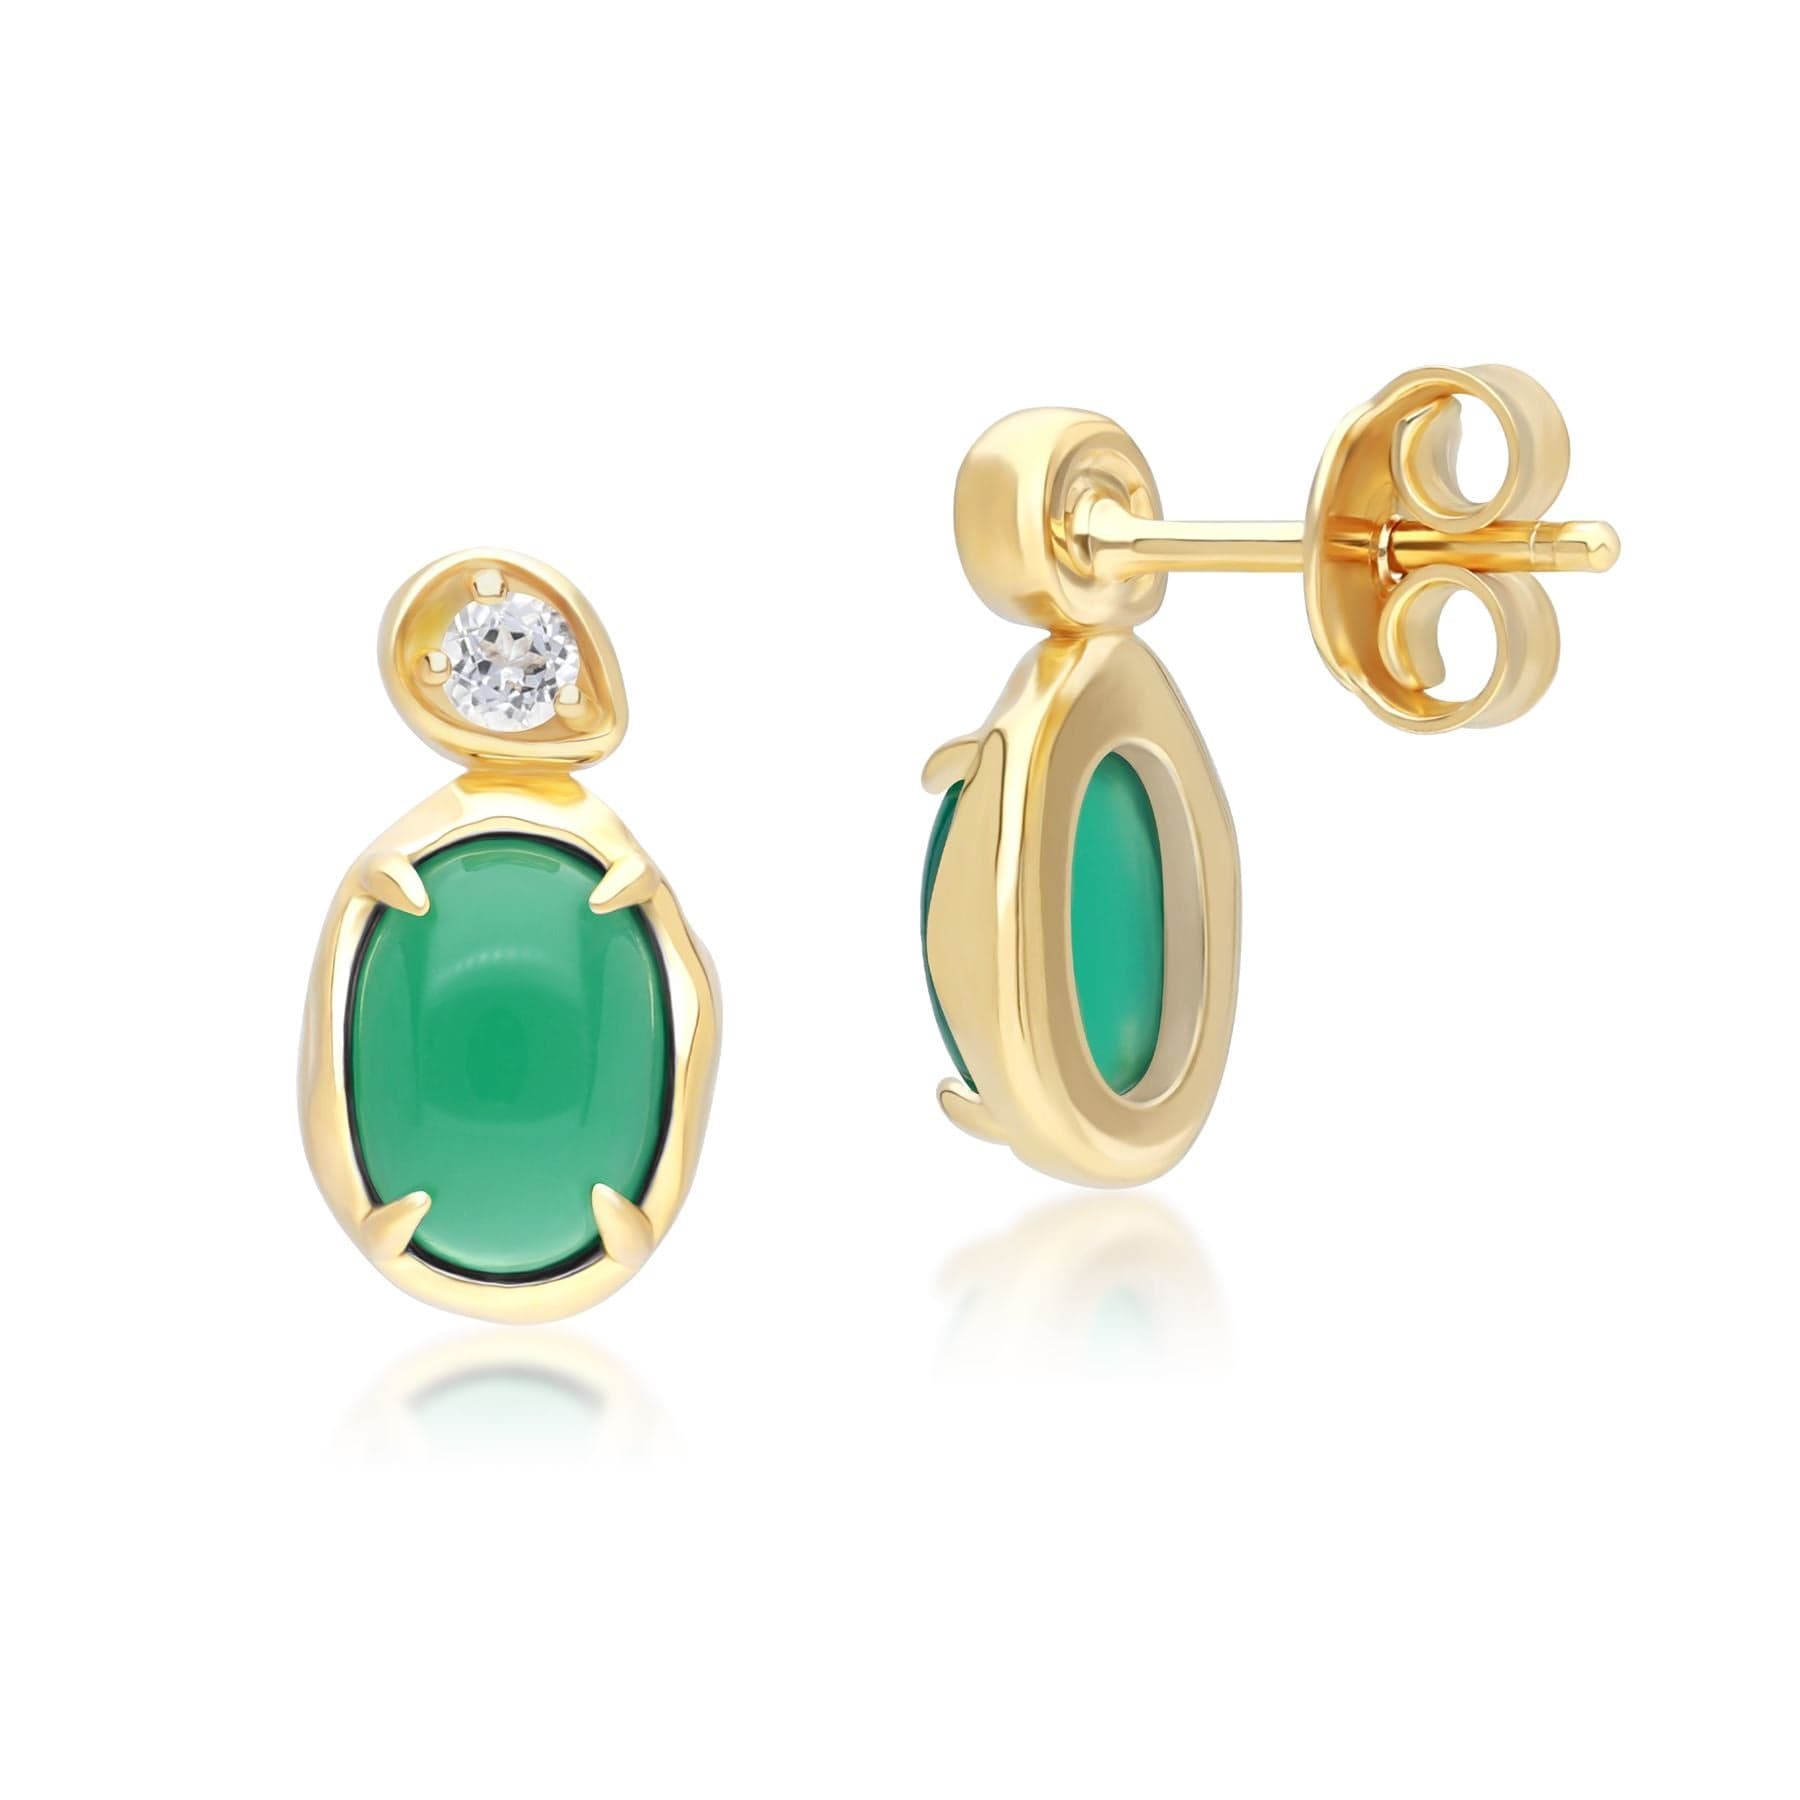 Irregular Oval Dyed Green Chalcedony & Topaz Drop Earrings In 18ct Gold Plated SterlIng Silver